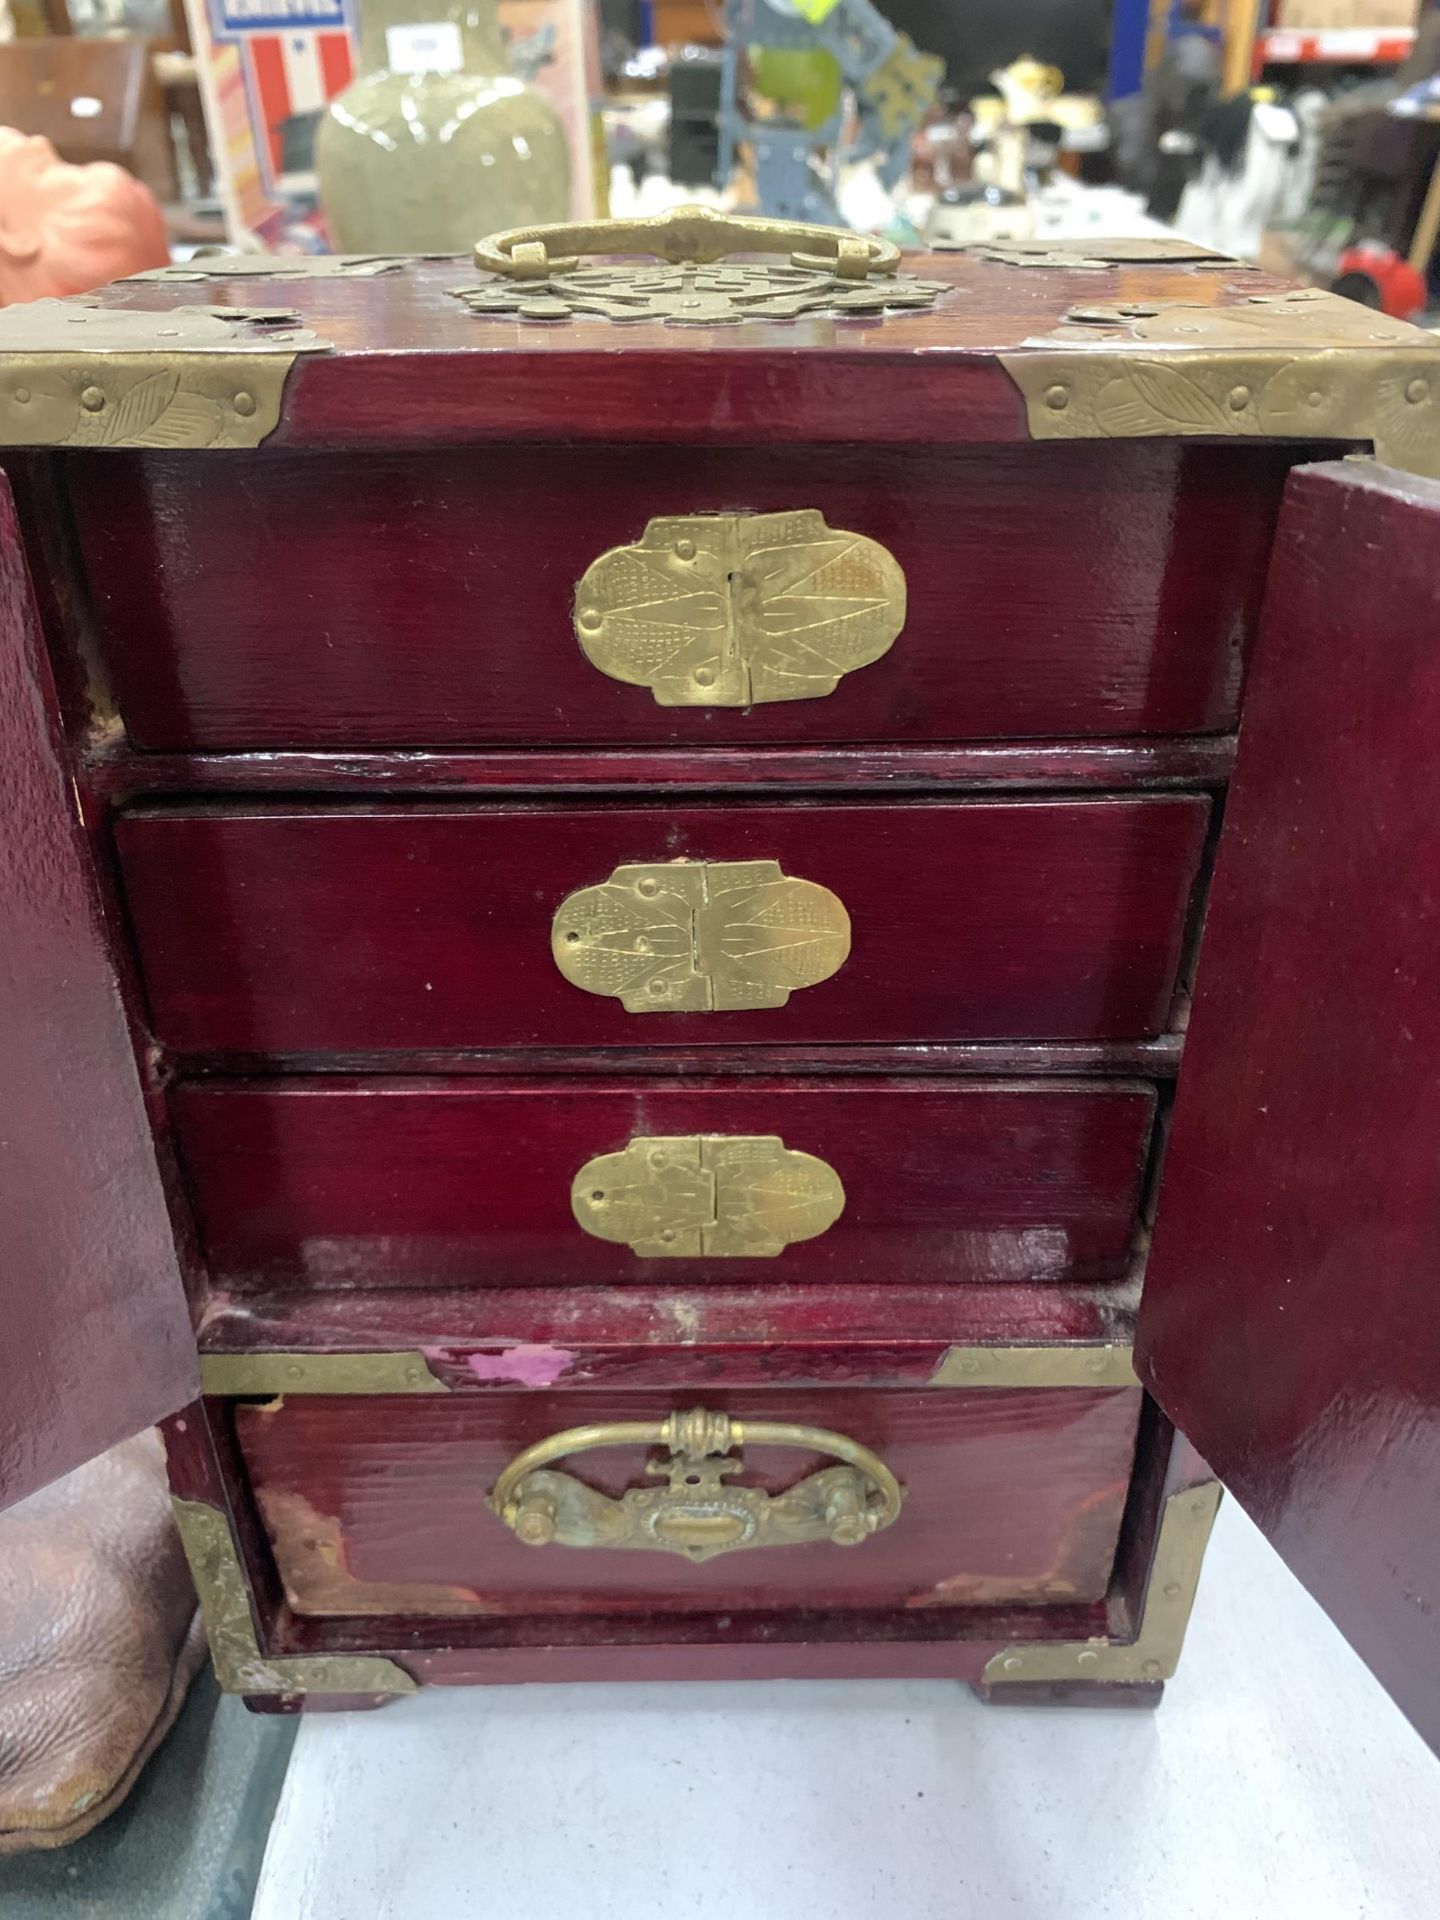 AN ORIENTAL STYLE RED CABINET WITH METAL FITTINGS HEIGHT 24CM, WIDTH 18CM, DEPTH 13CM - Image 2 of 5